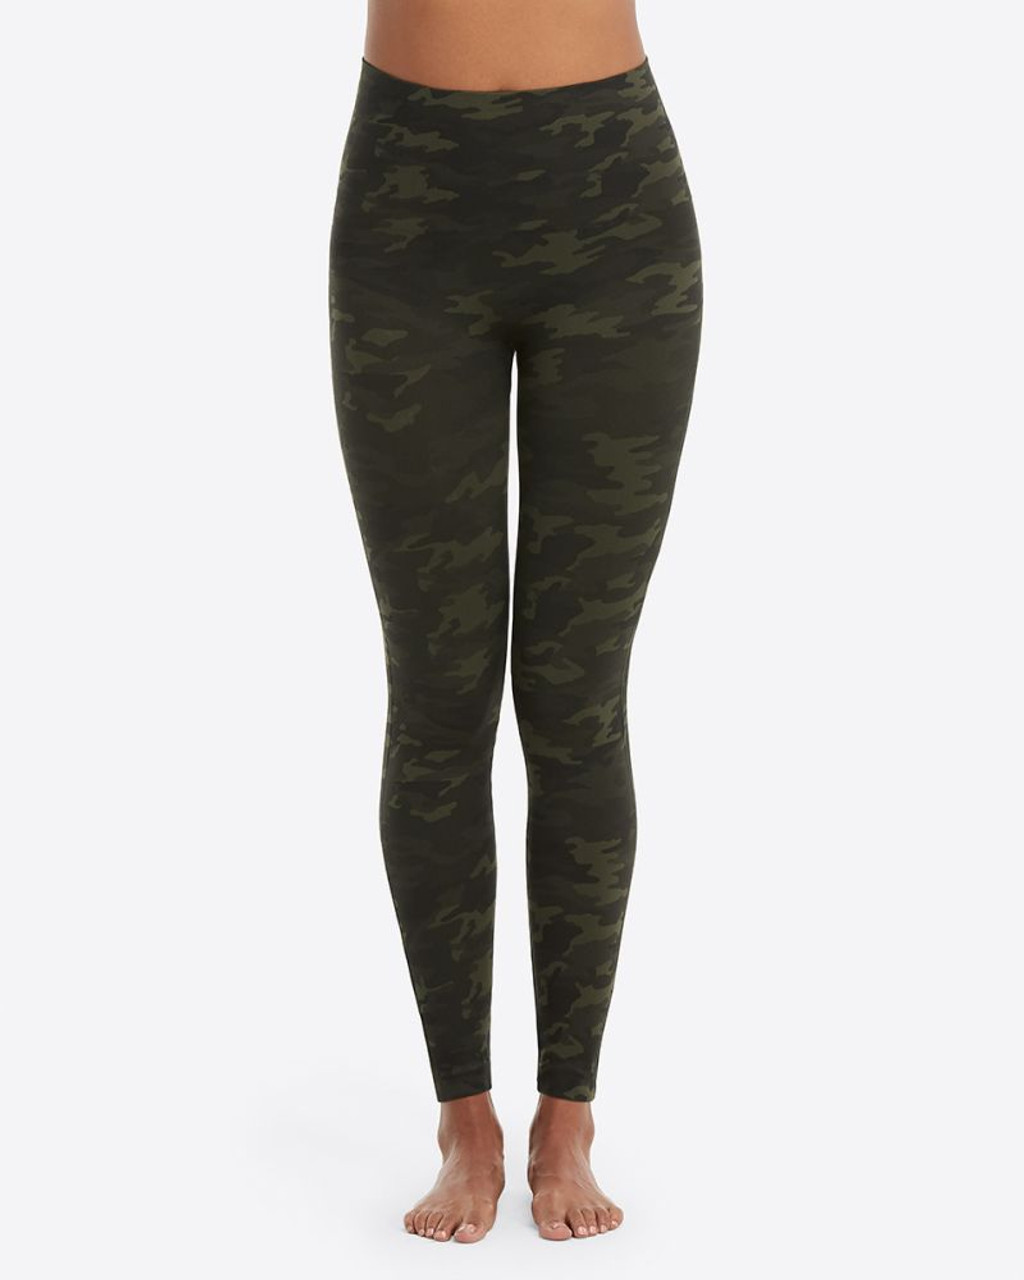 Look At Me Now Seamless Leggings- Green Camo - Monkee's of Raleigh